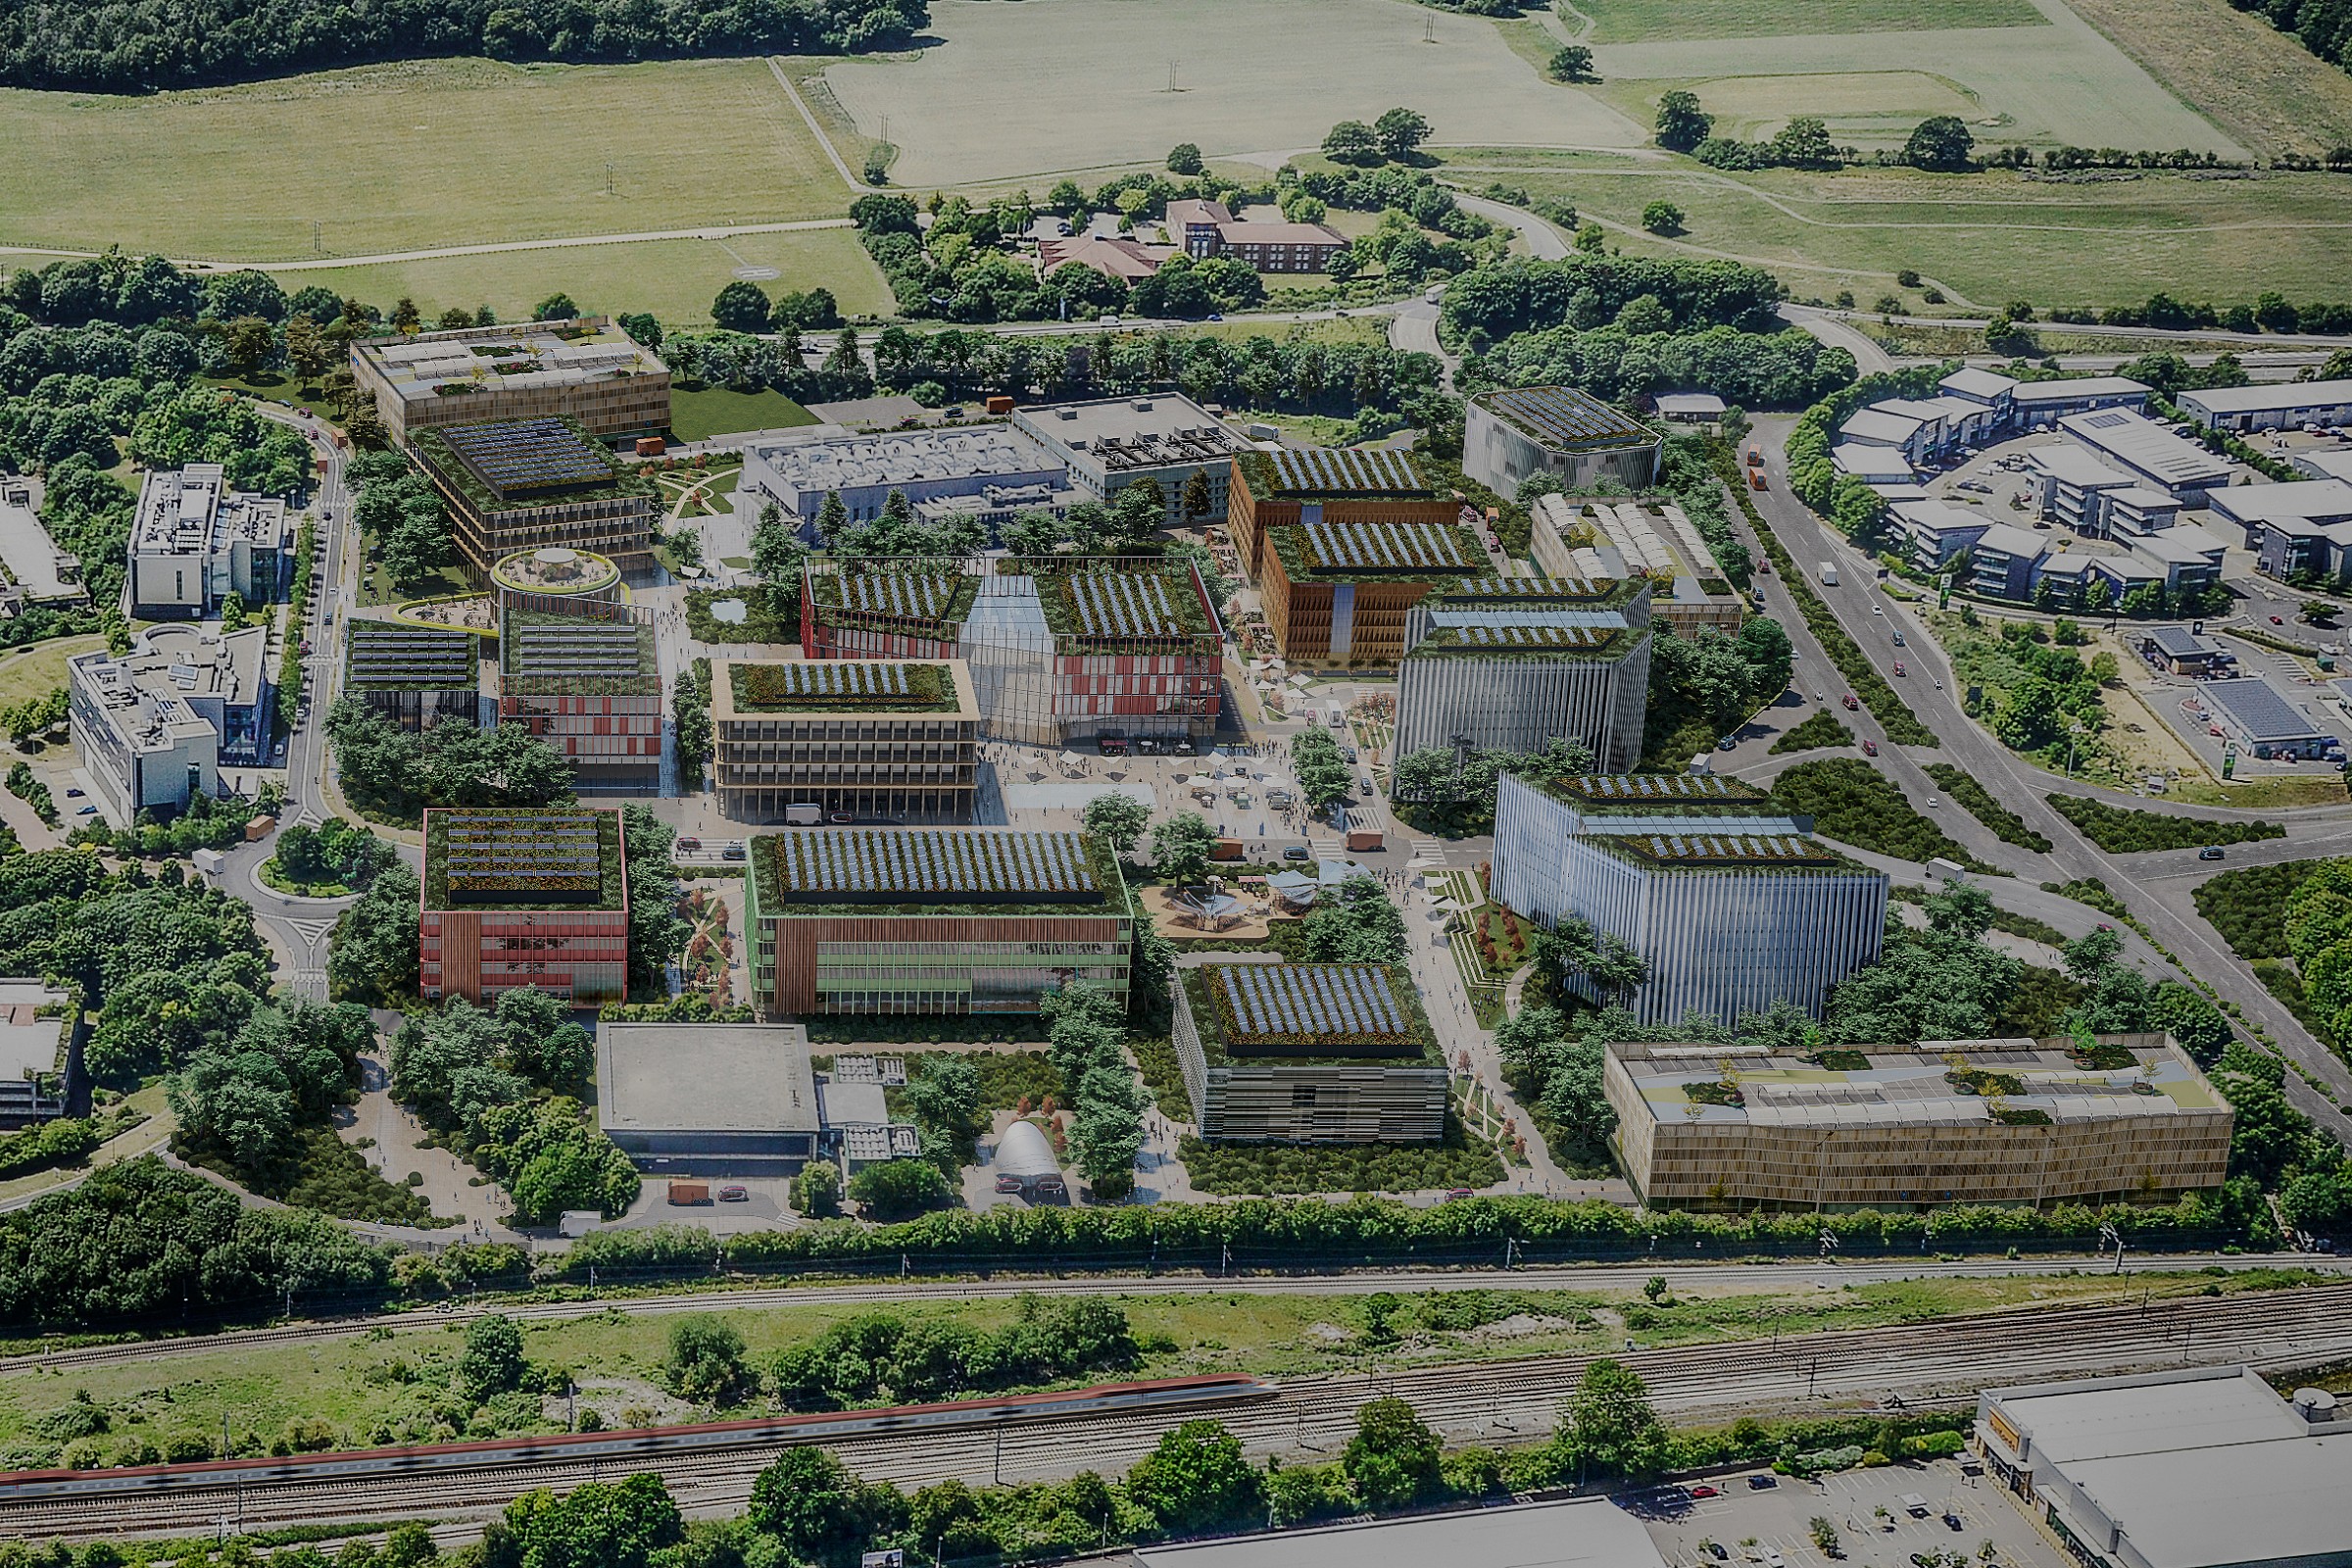 1.6 million sq ft of office, lab and GMP space on one site, just south of Stevenage town centre